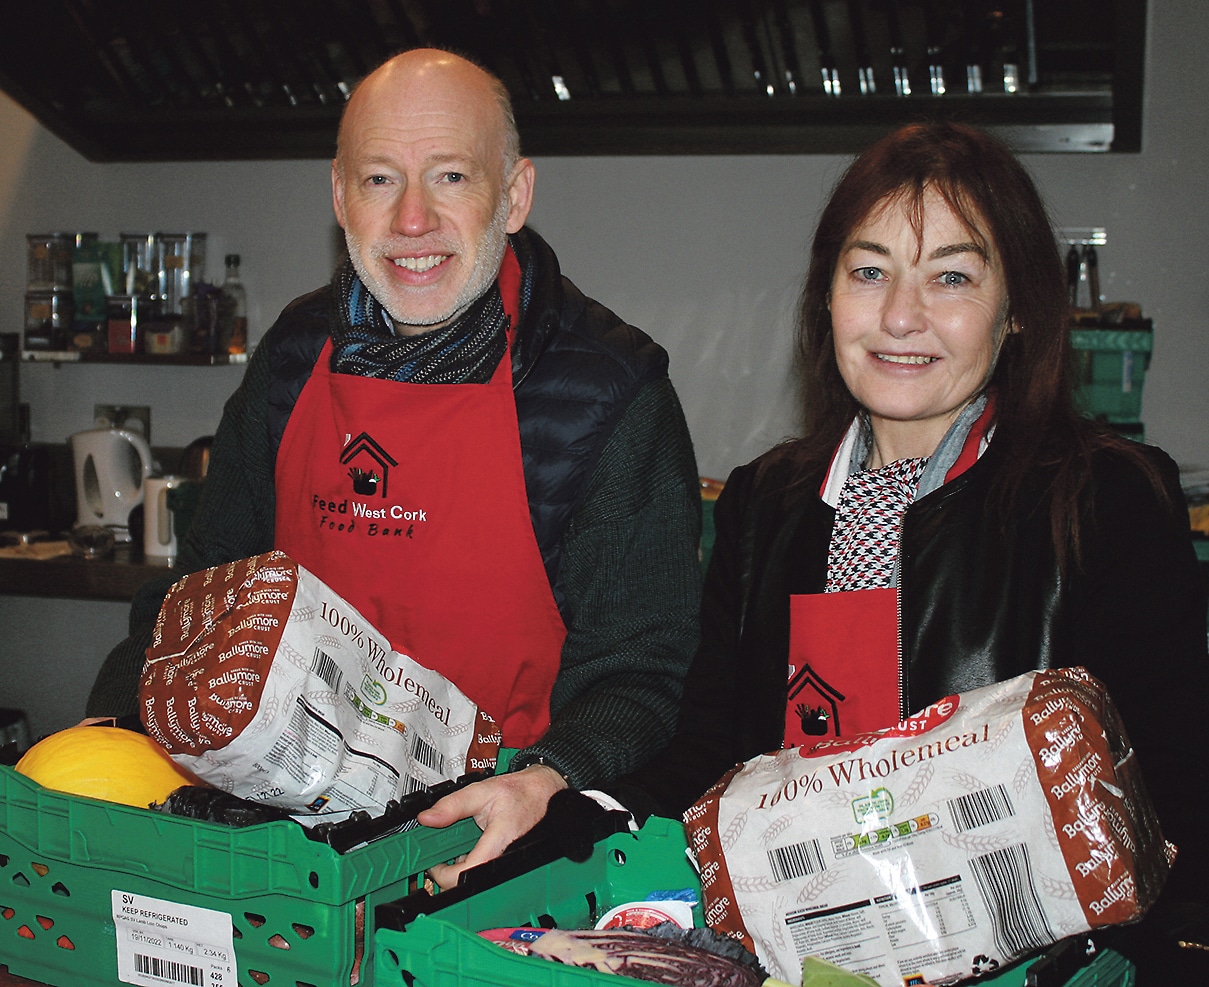 Putting food on the table for struggling West Cork families